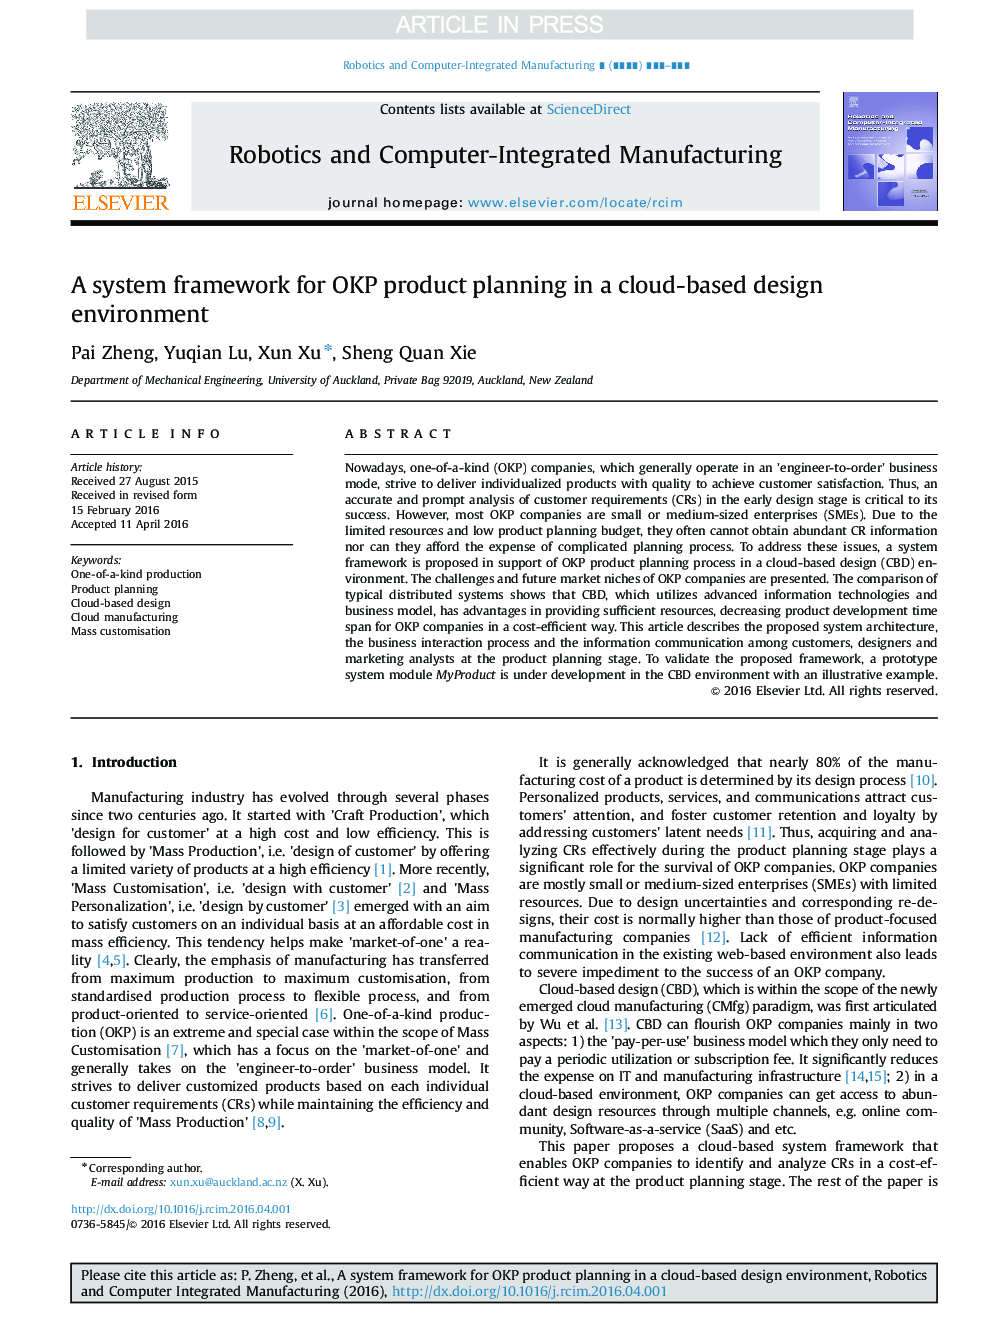 A system framework for OKP product planning in a cloud-based design environment